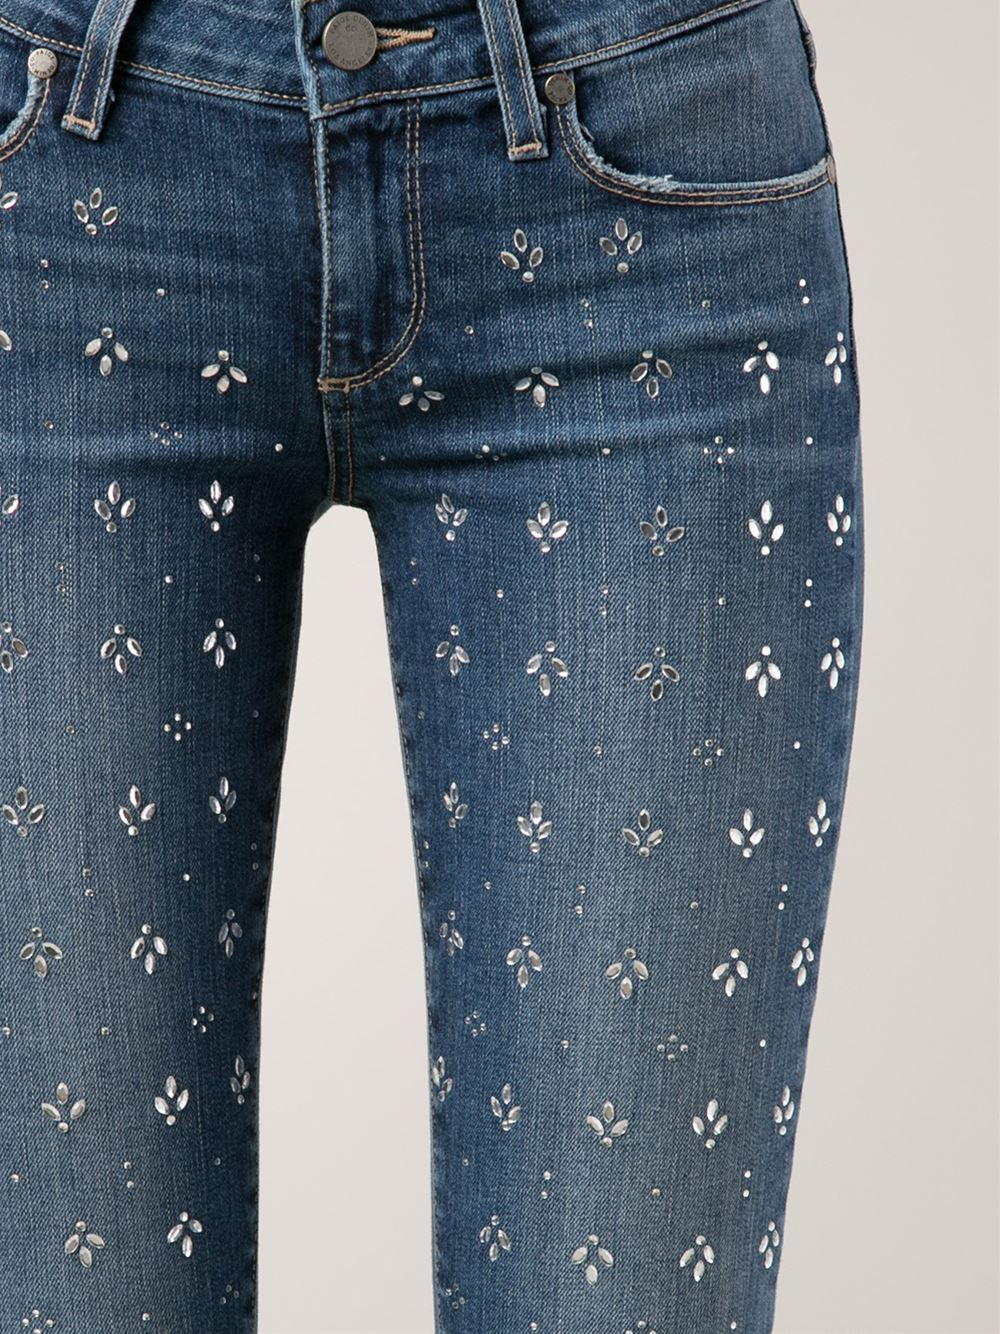 Lyst - Paige Embellished Skinny Jeans in Blue